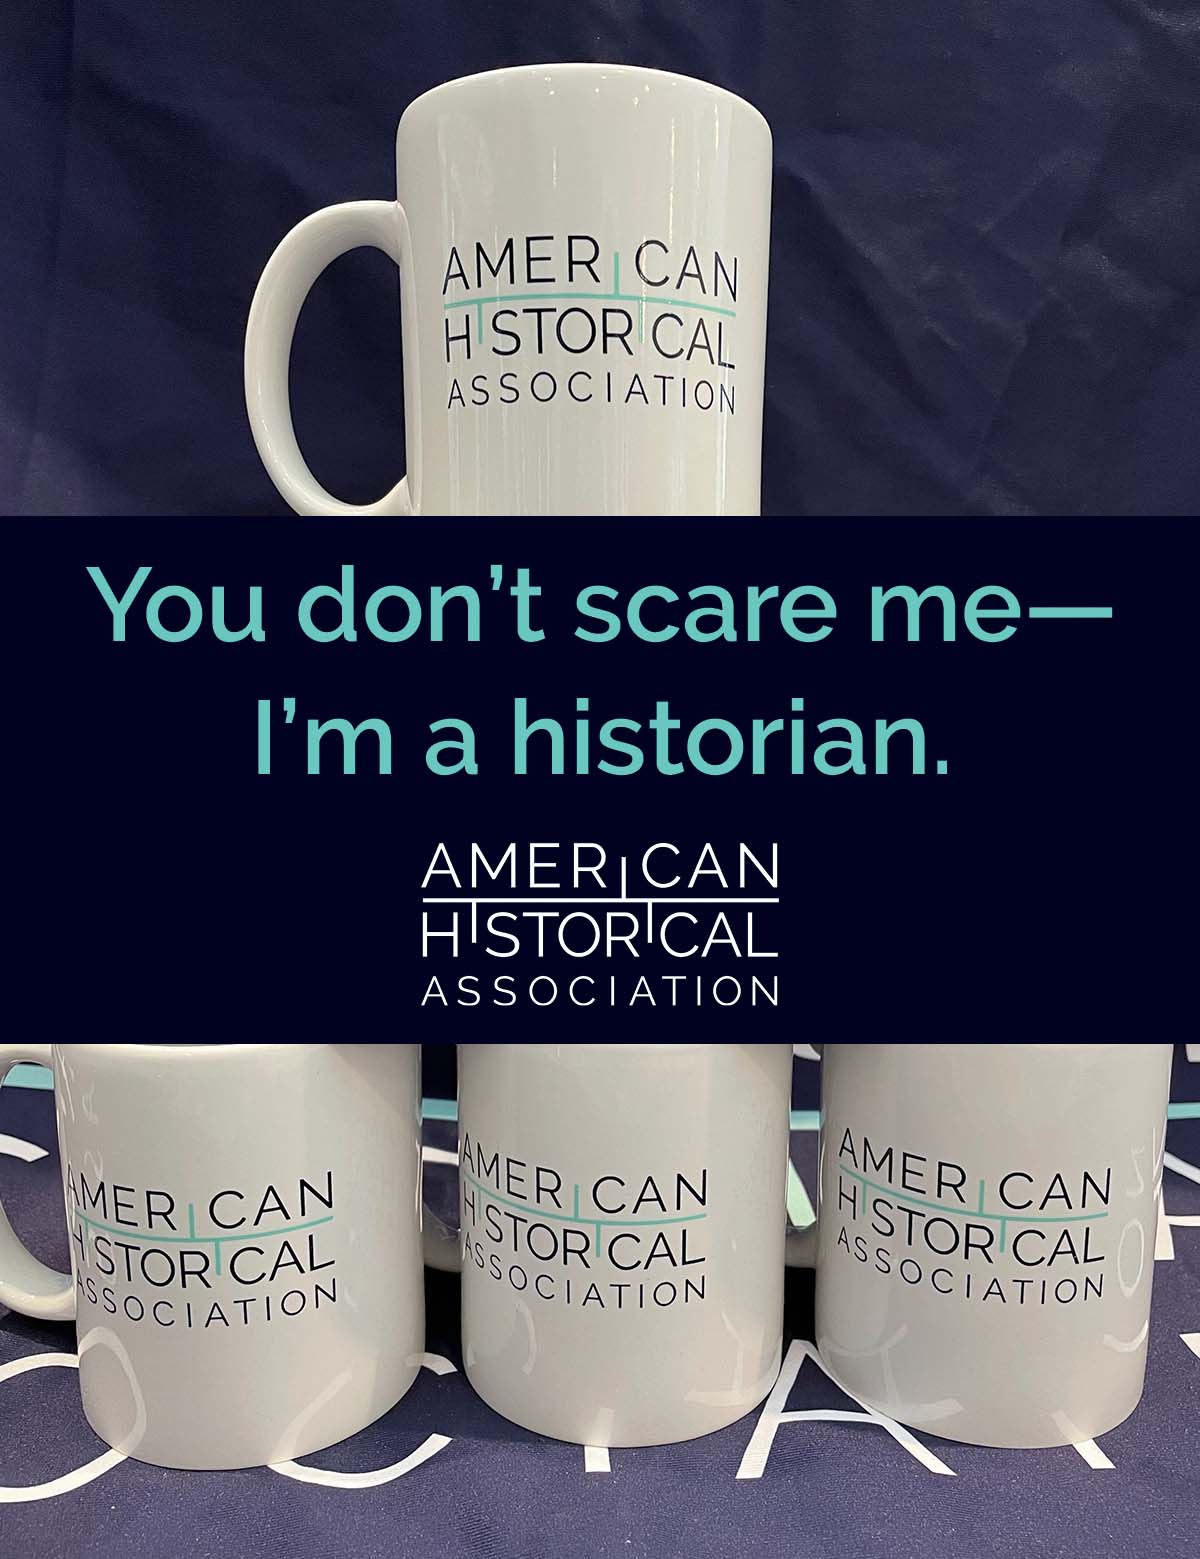 A pyramid of six white mugs with the AHA logo in teal sitting on a dark blue AHA table cloth. The AHA slogan, You don’t scare me—I’m a historian, in teal text on a black background with the American Historical Association logo underneath in white text is centered on the image. 